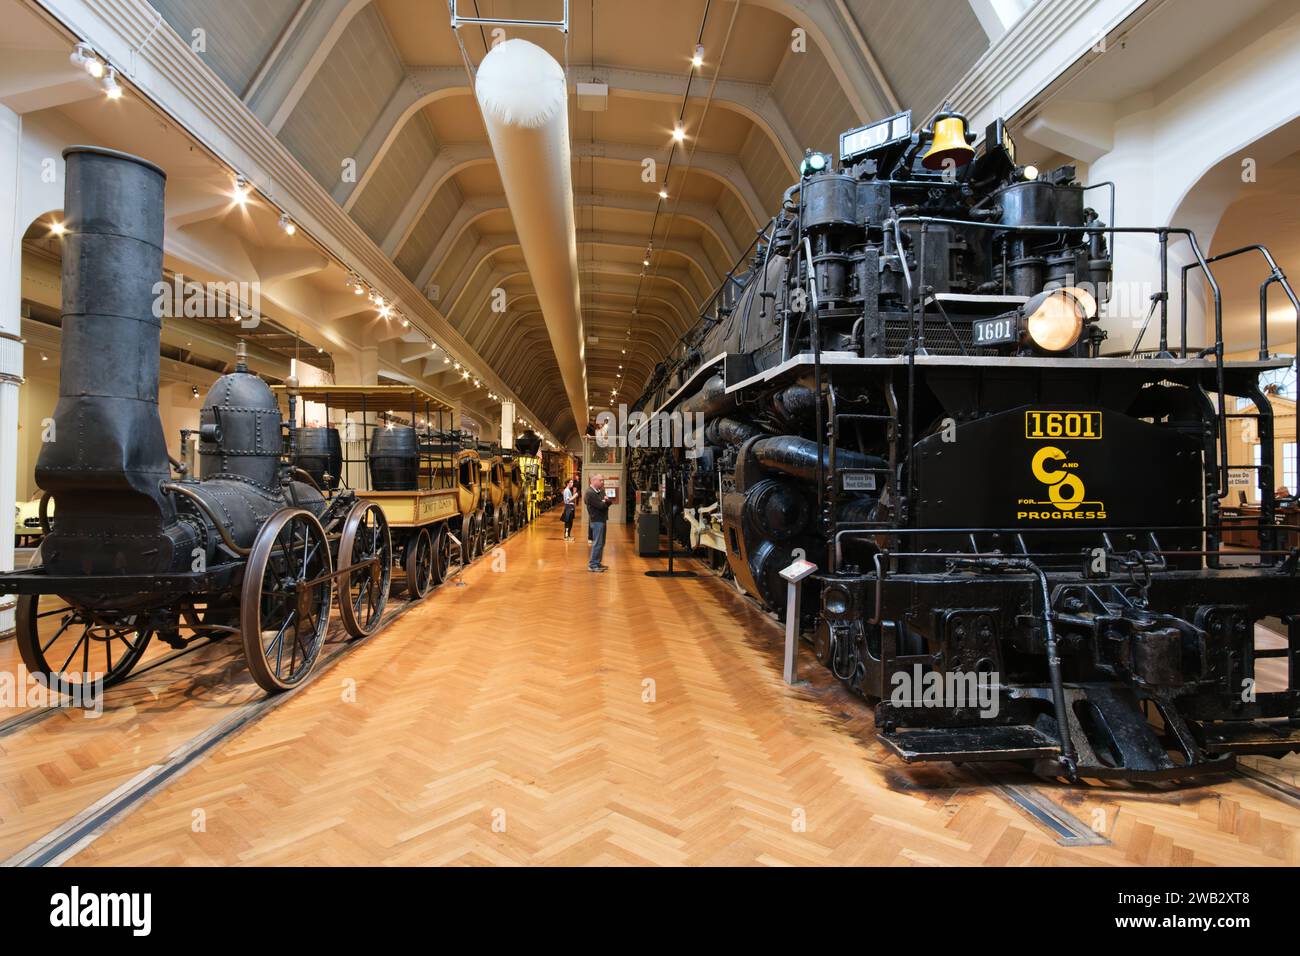 1831 De Witt Clinton reproduction and 1941 Allegheny locomotives on display at The Henry Ford Museum of American Innovation Stock Photo